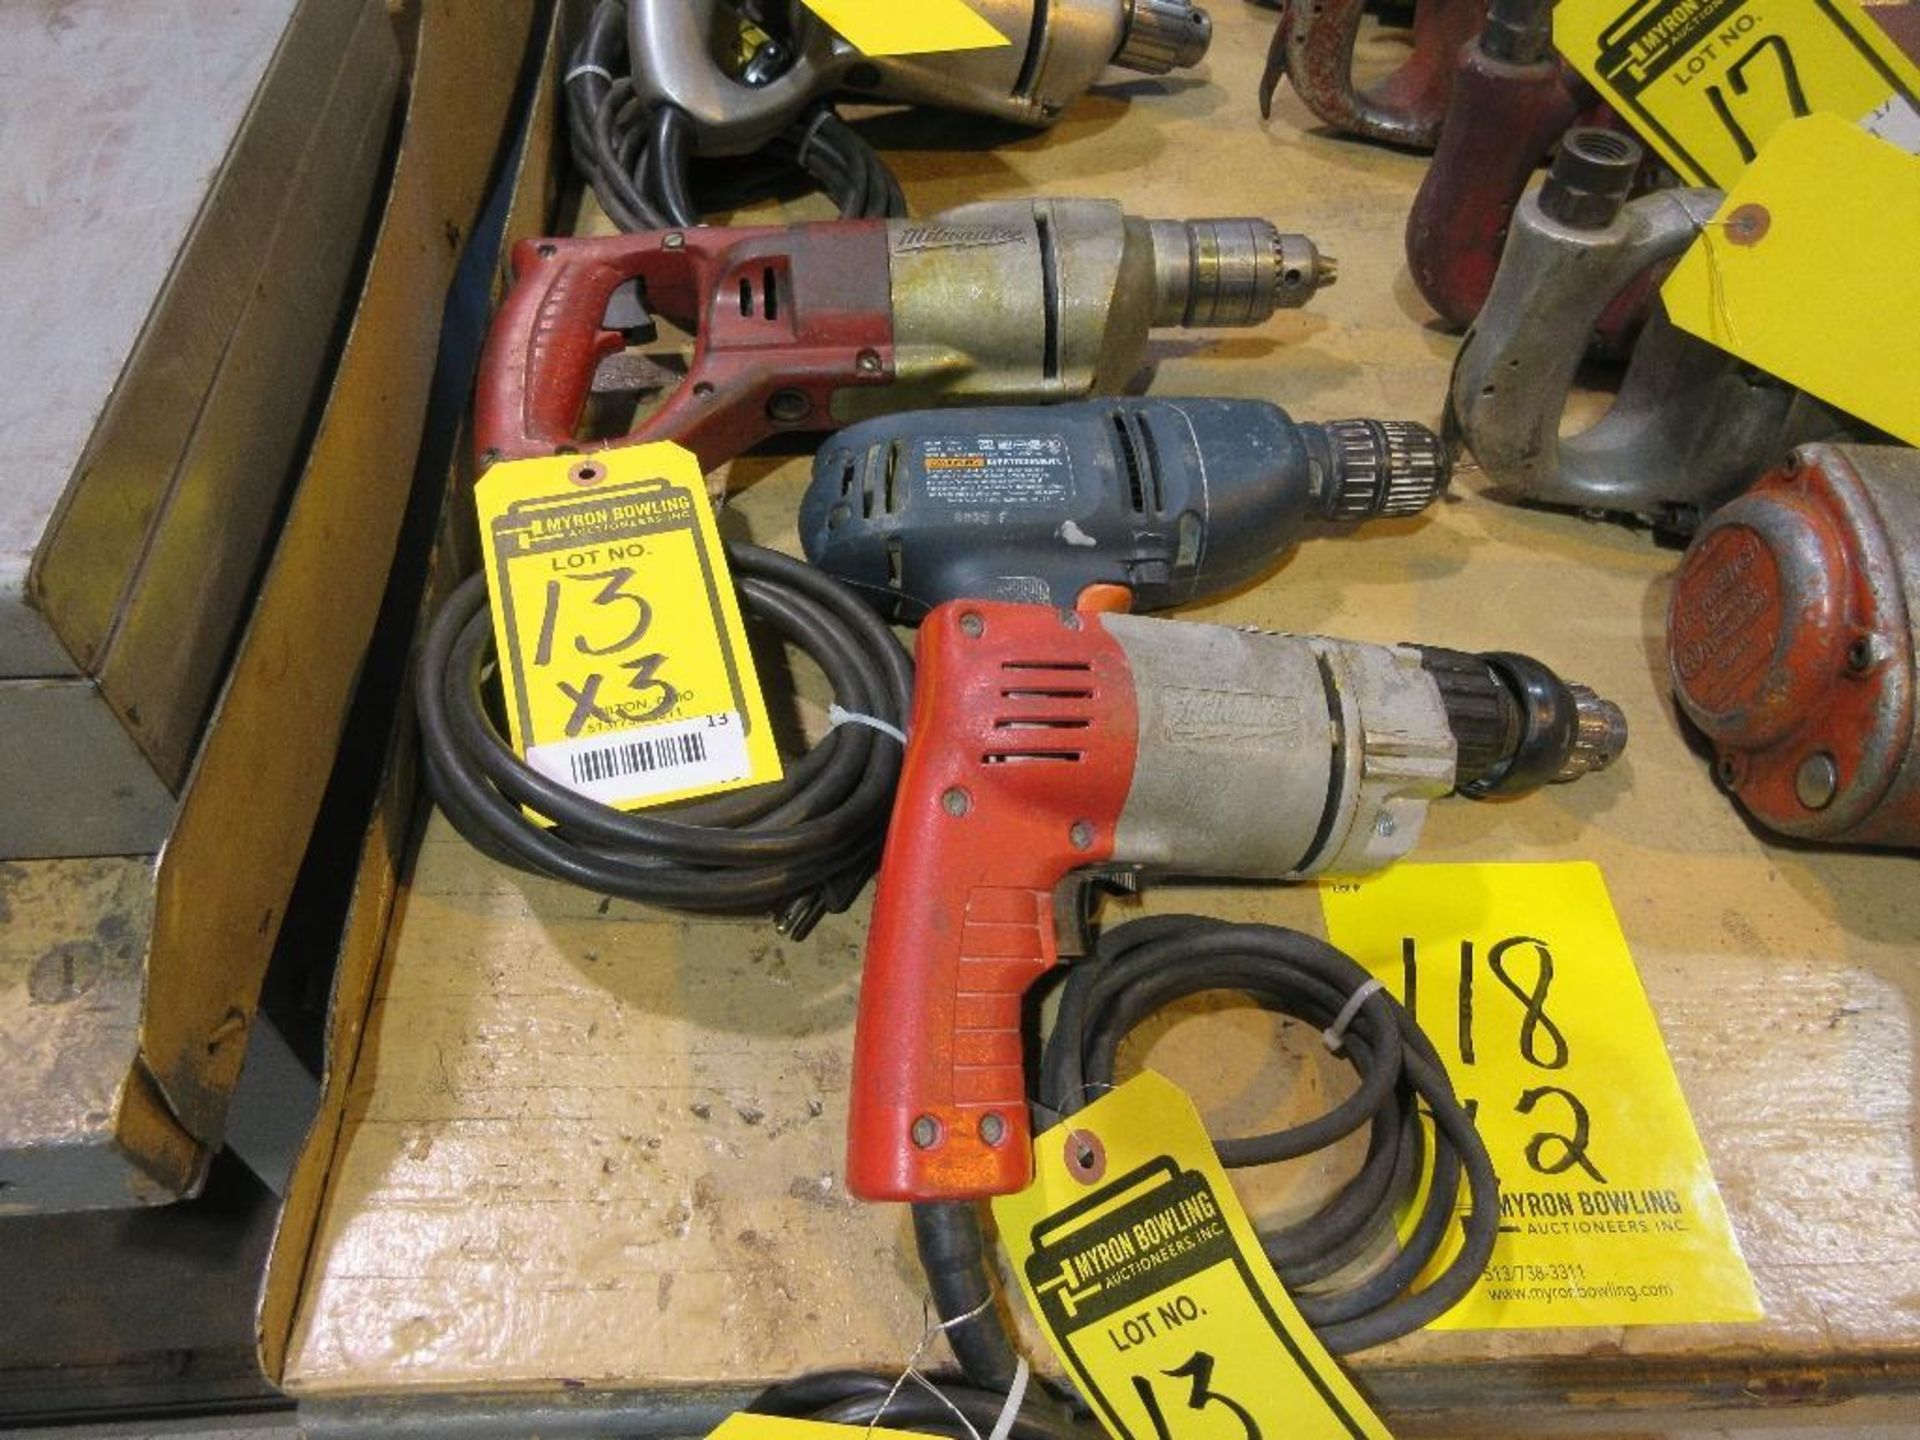 (3) ELECTRIC DRILLS, (1) 1/2 IN. CHUCK, (2) 3/8 IN. CHUCK